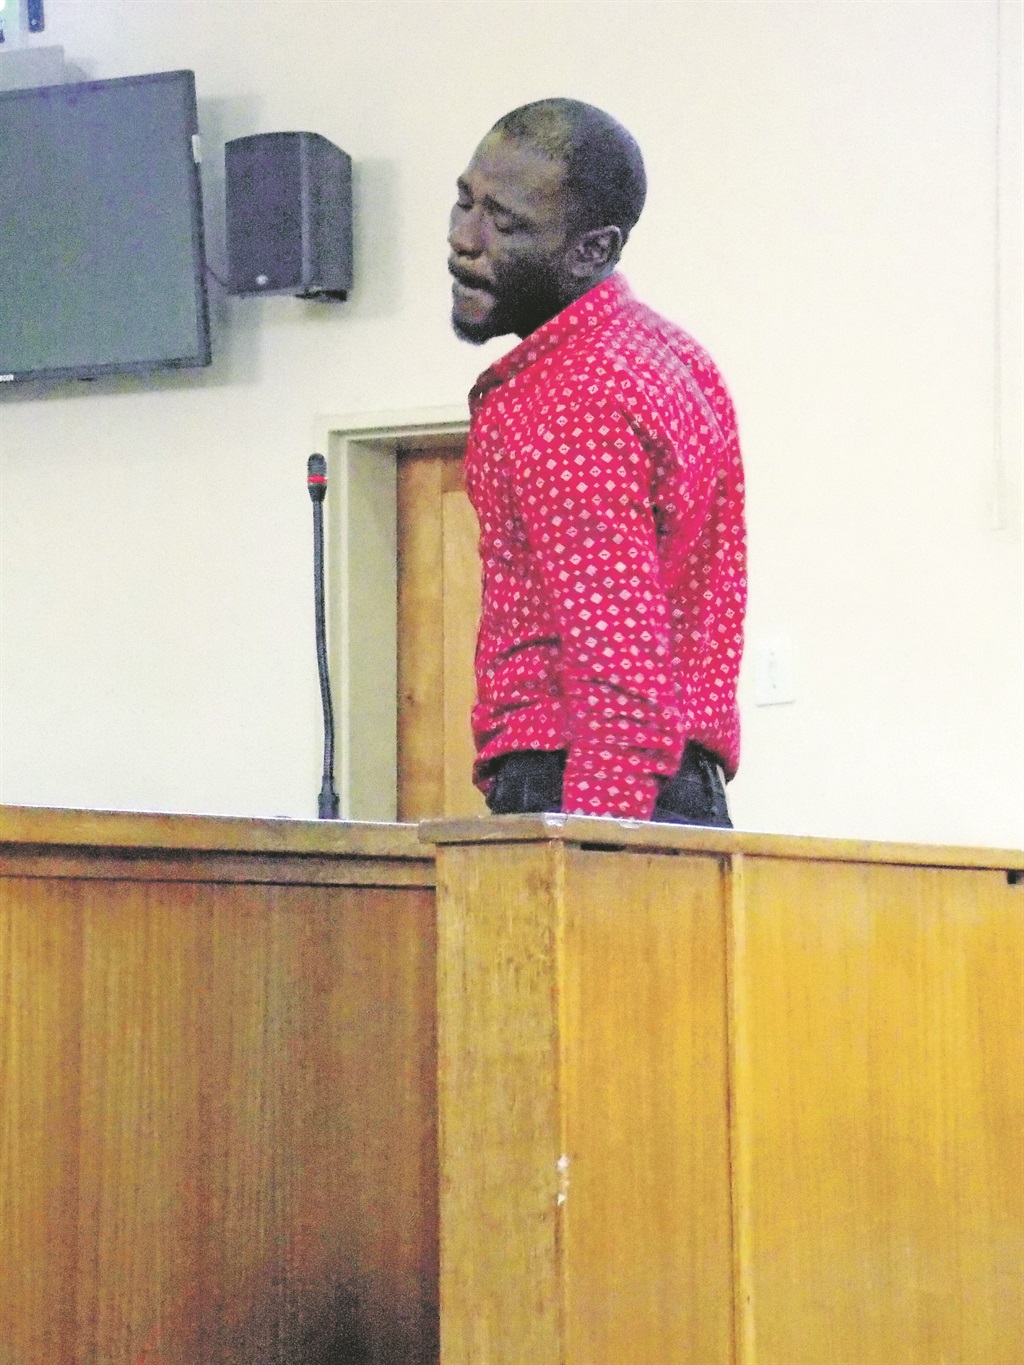 Prince Hlungwane was sentenced to 12 years in prison on Tuesday.Photo by Tlangelani Khosa